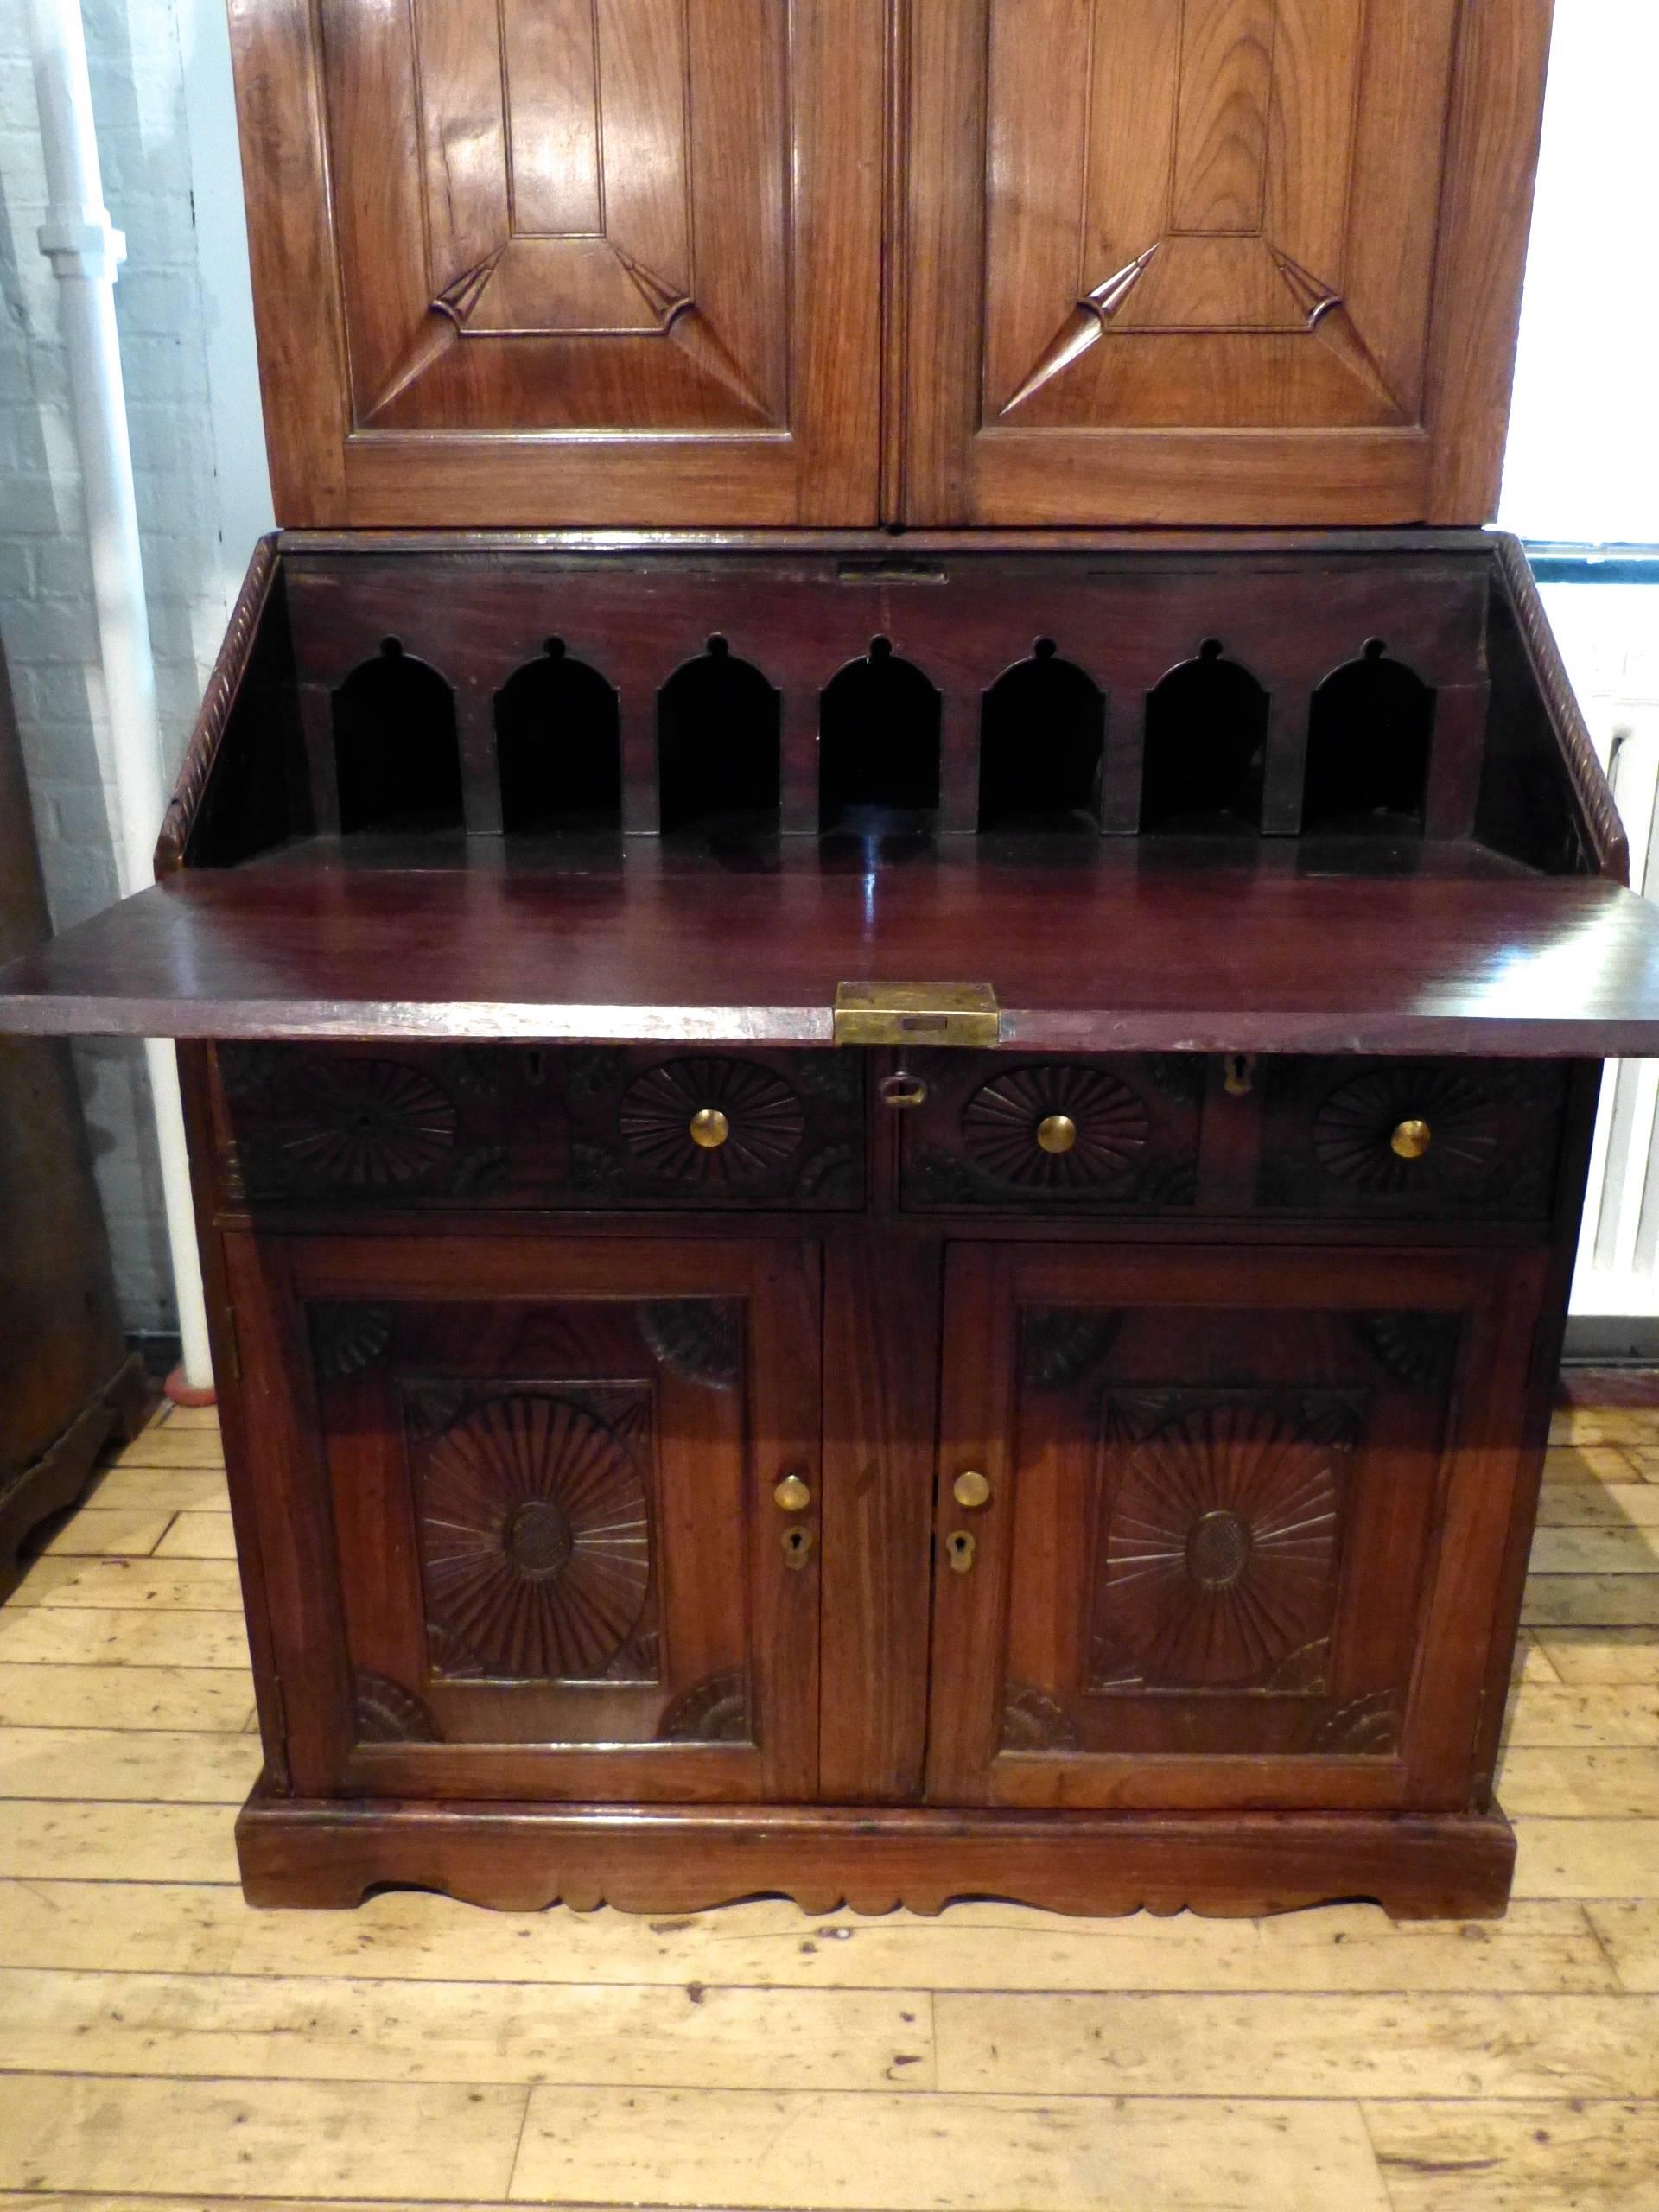 A good and highly decorated Padouk wood mid-19th century bureau cabinet with a fitted interior to the drop front and two drawers in the upper cabinet section, circa 1850.